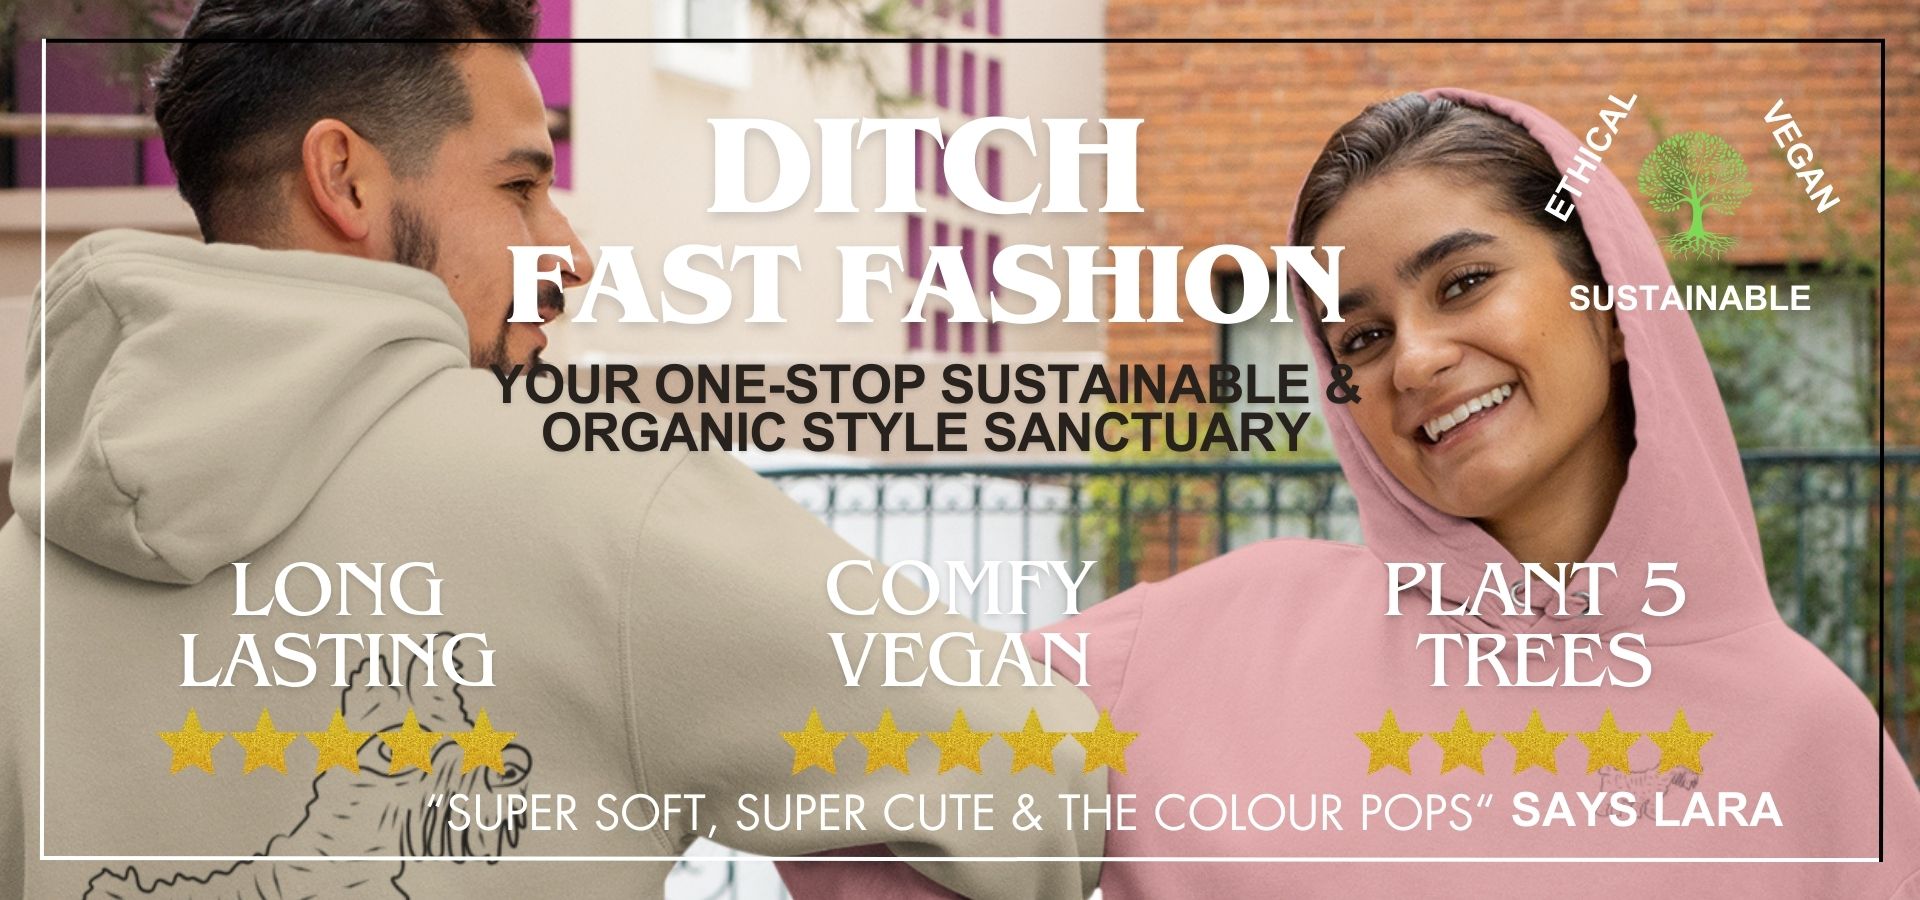 ditch fast fashion poster